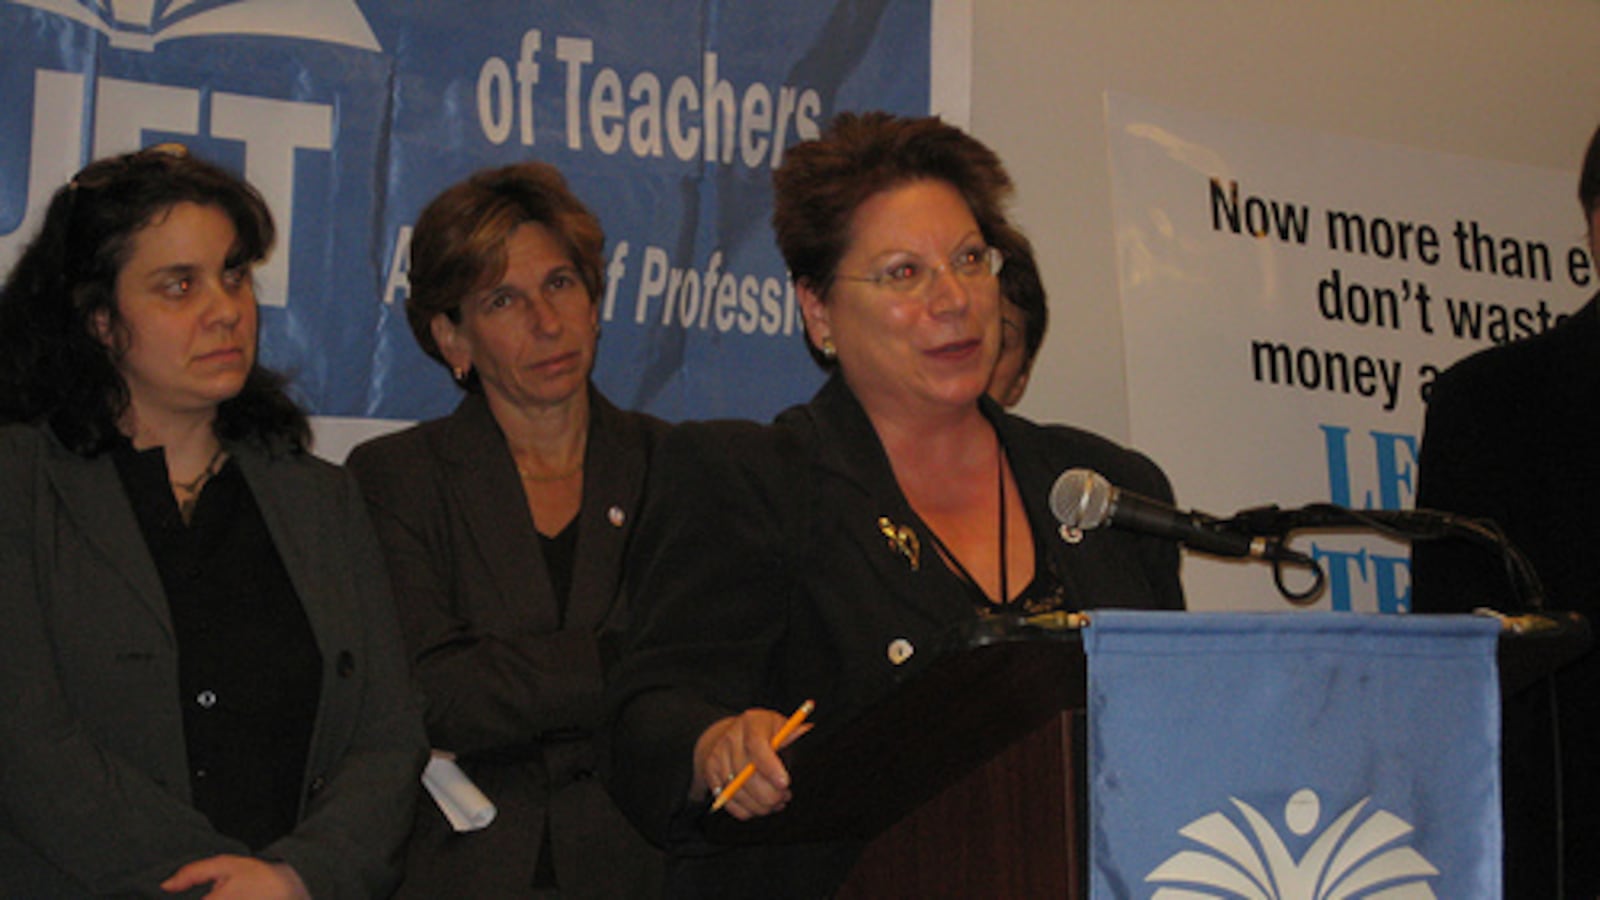 Members of the Absent Teacher Reserve pool who did extensive job searches spoke at a press conference with then teachers union President Randi Weingarten at the start of the school year in 2009. (GothamSchools)